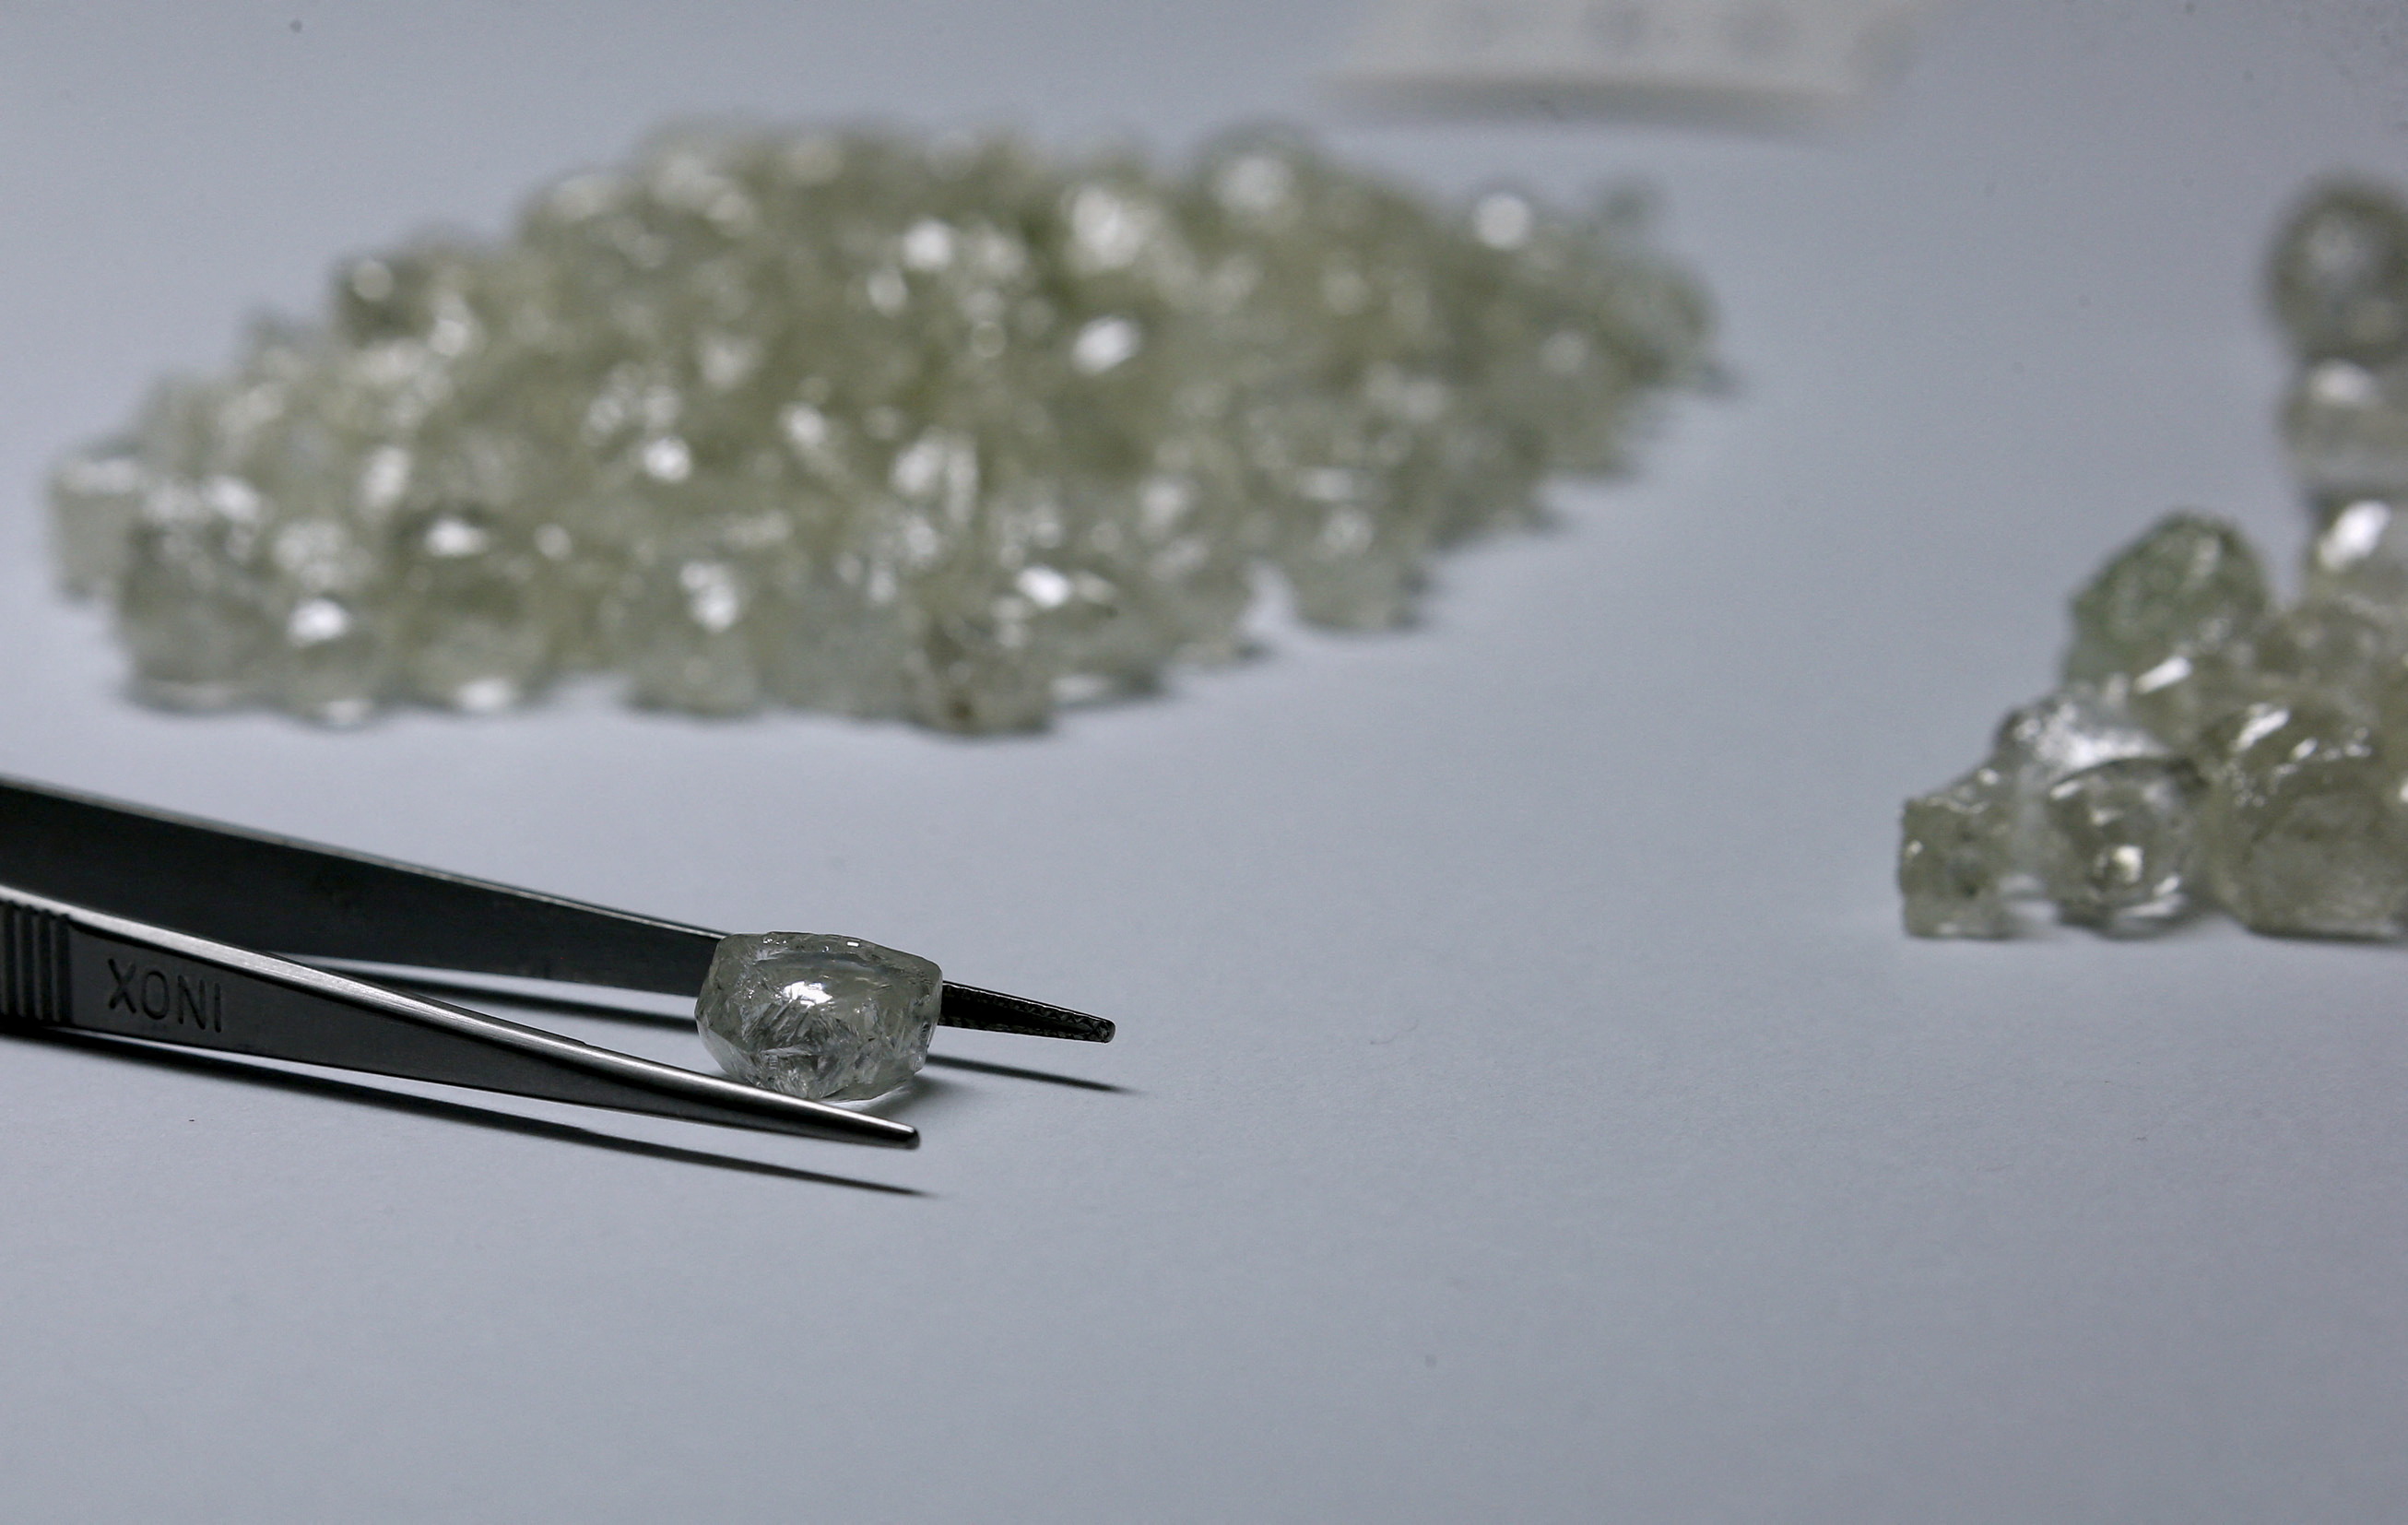 Diamonds are displayed during a visit to the De Beers Global Sightholder Sales (GSS) in Gaborone, Botswana